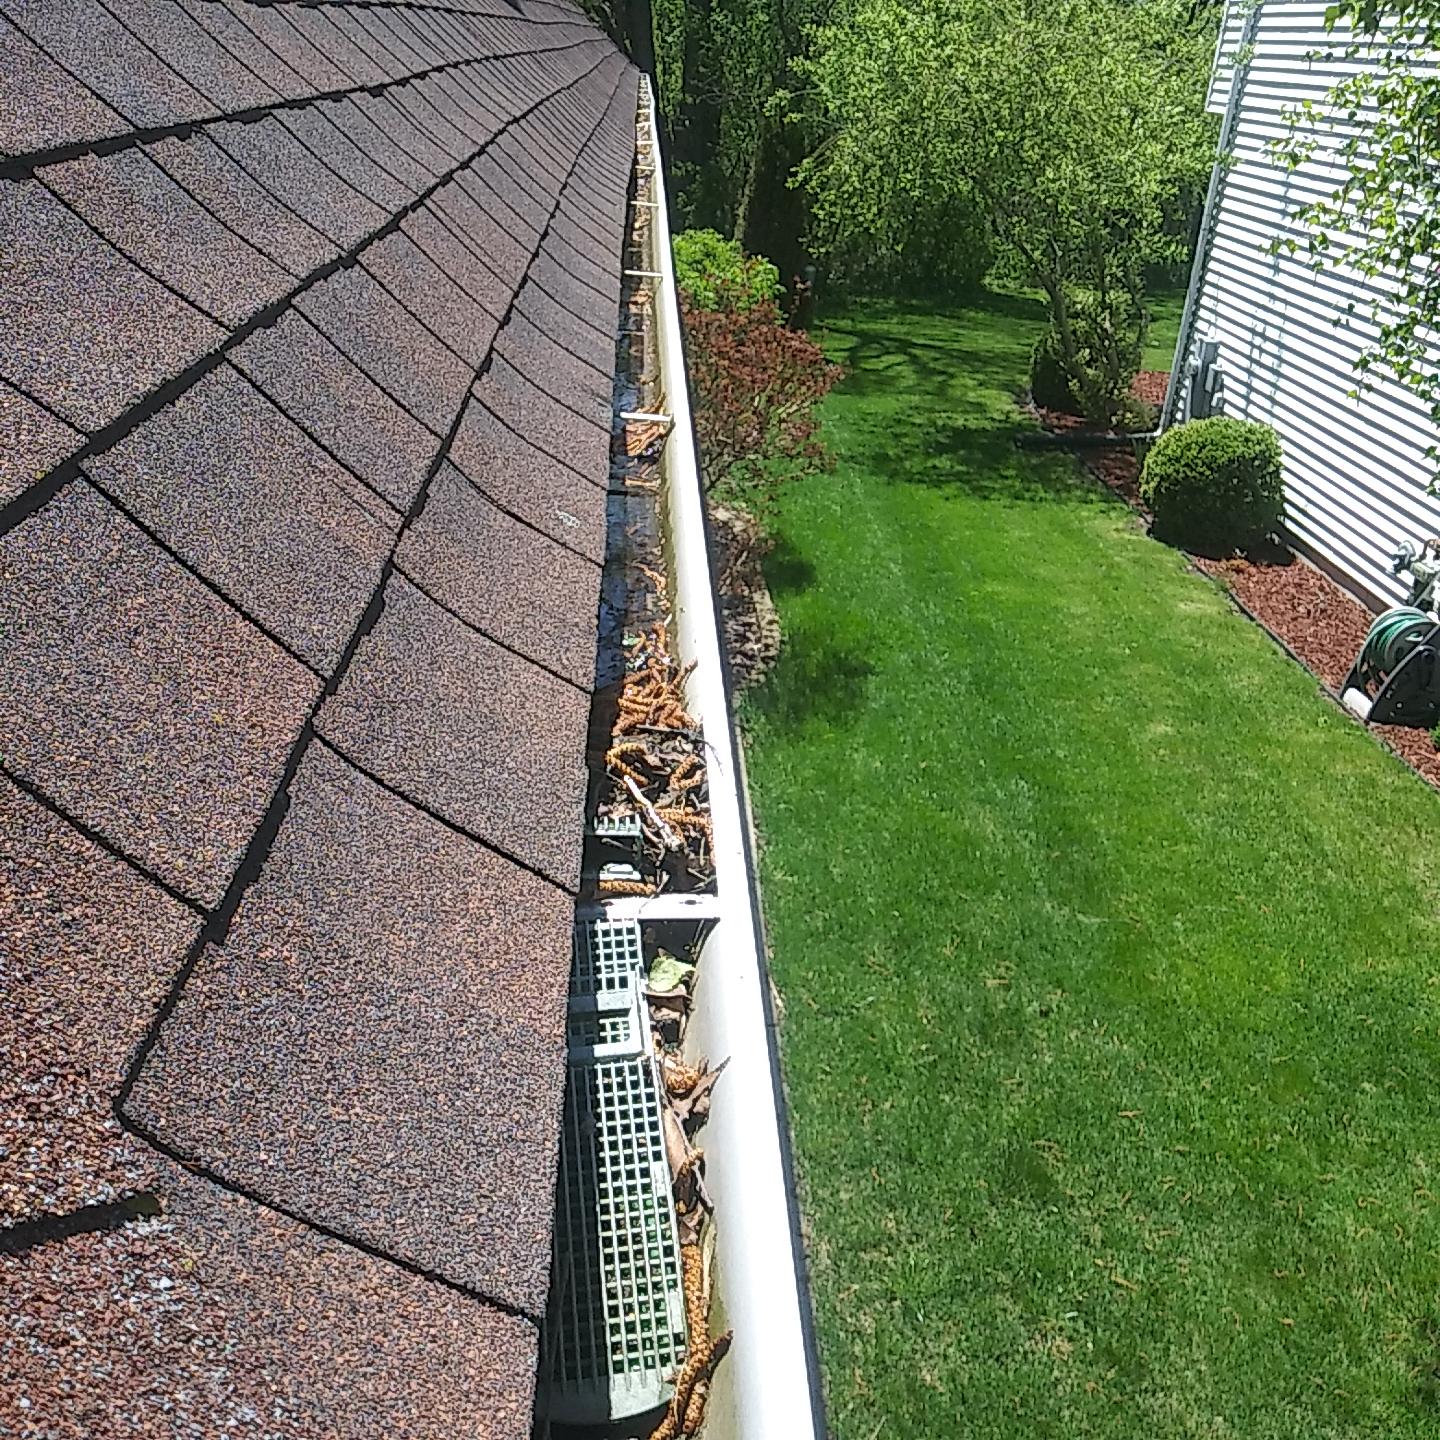 Gutter-Cleaners-In-Pittsburgh-15252.jpg